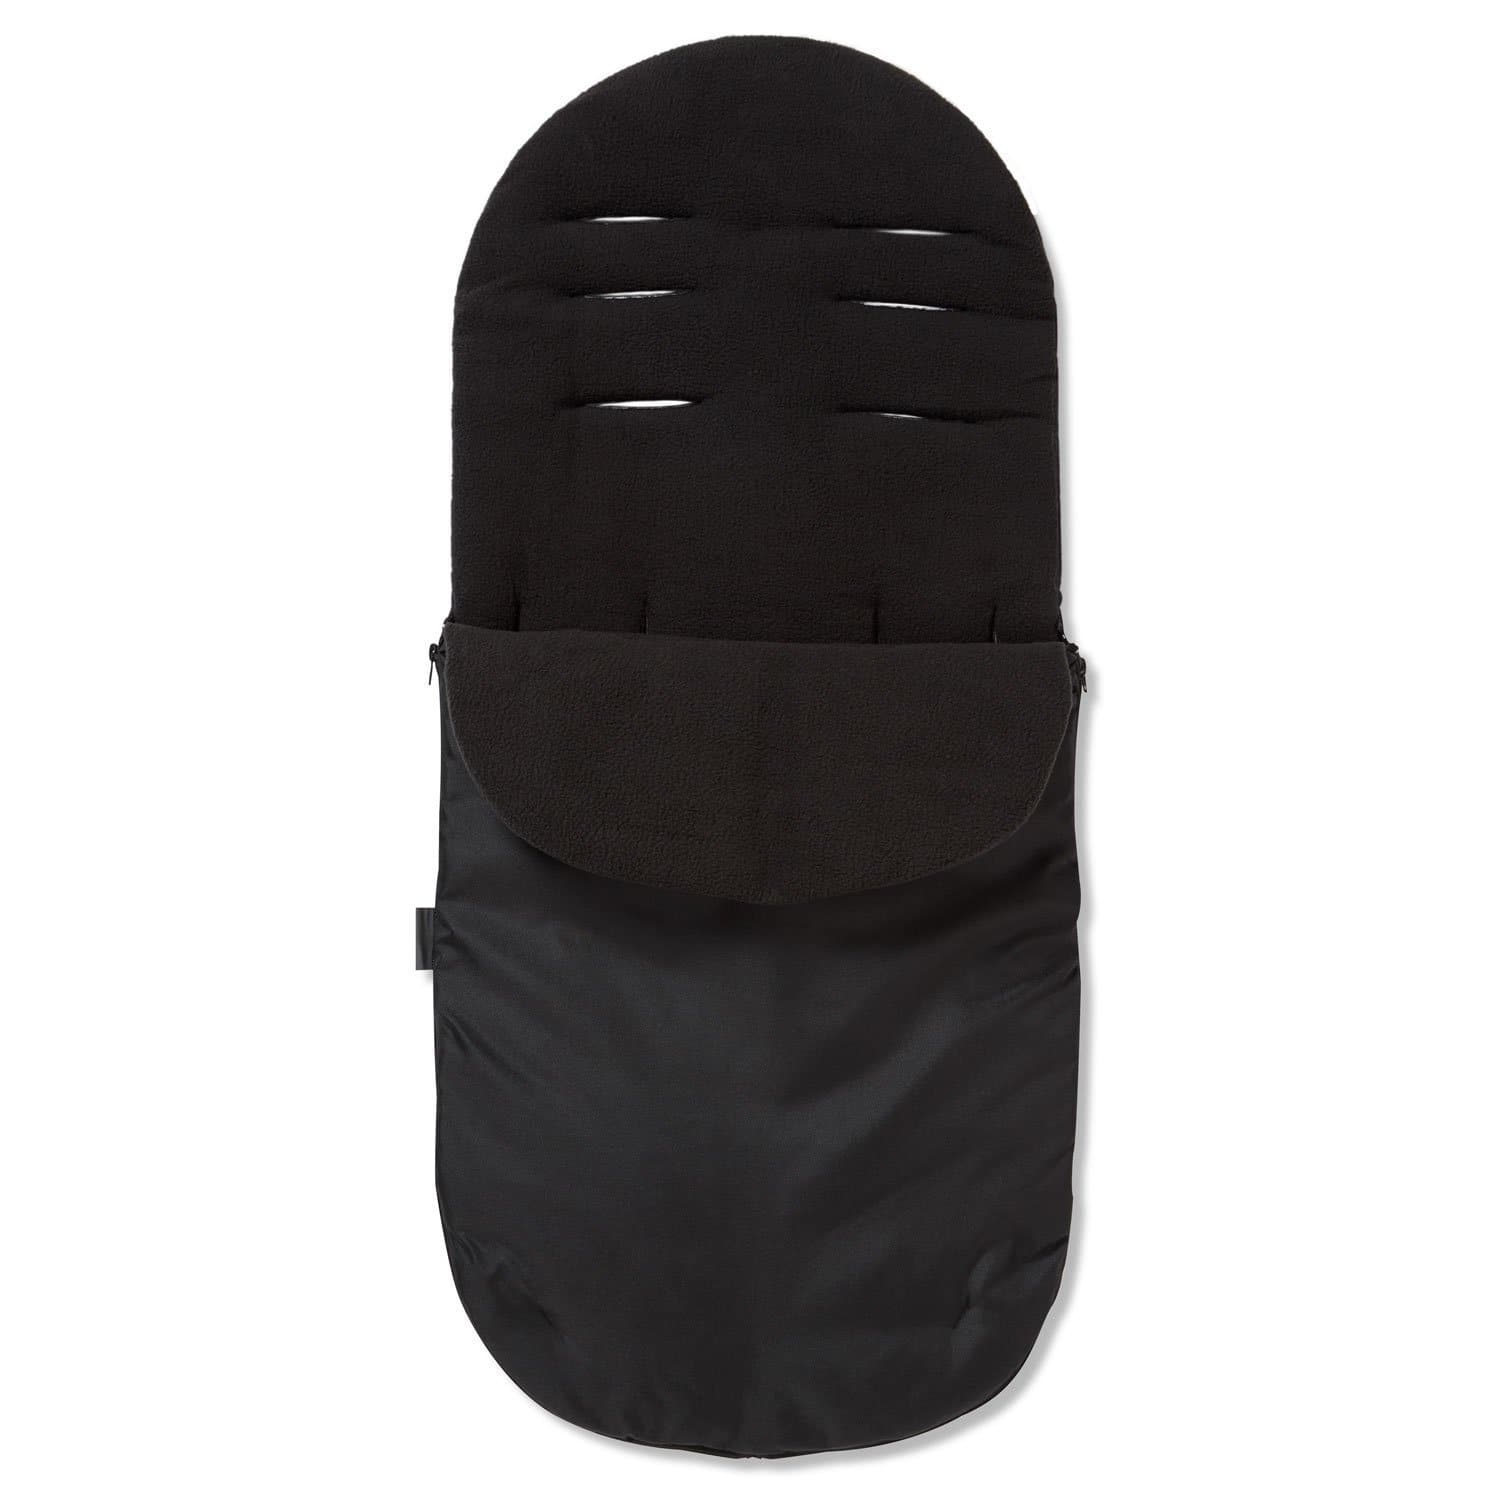 Footmuff / Cosy Toes Compatible with Babybus - Black / Fits All Models | For Your Little One